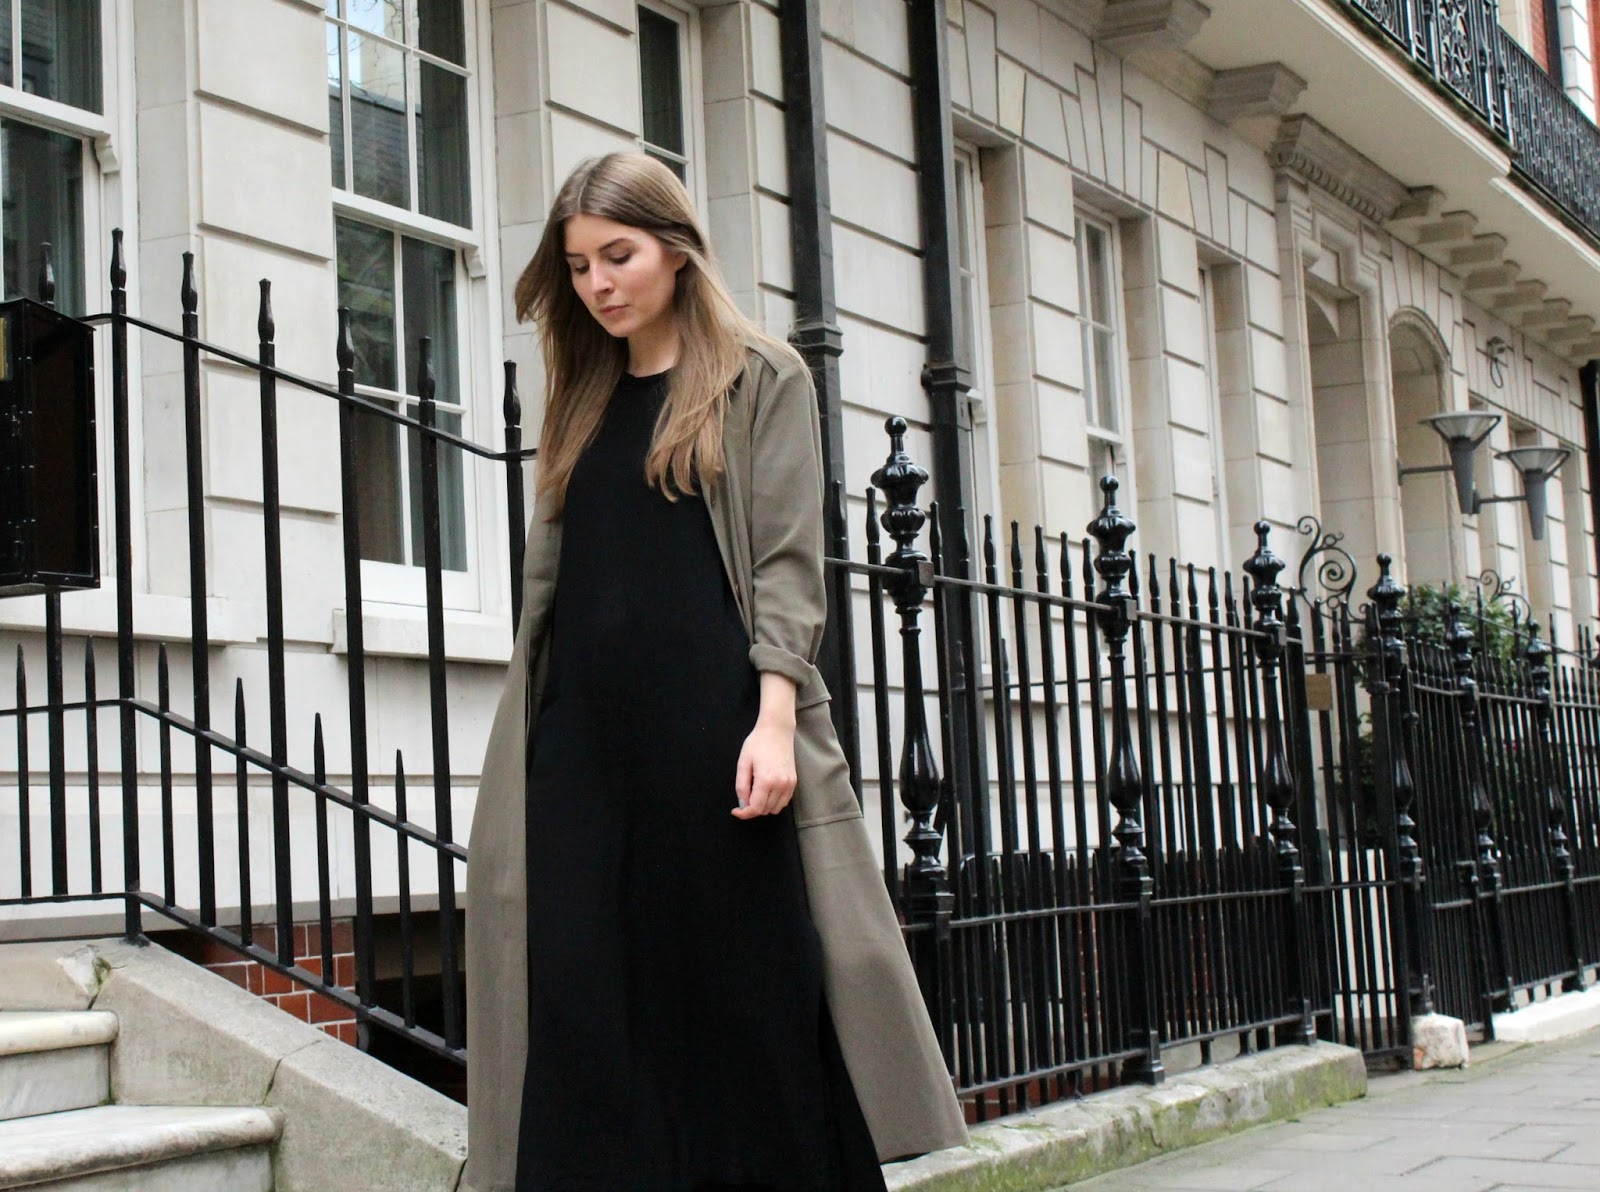 Khaki Trench at LFW | Style Trunk